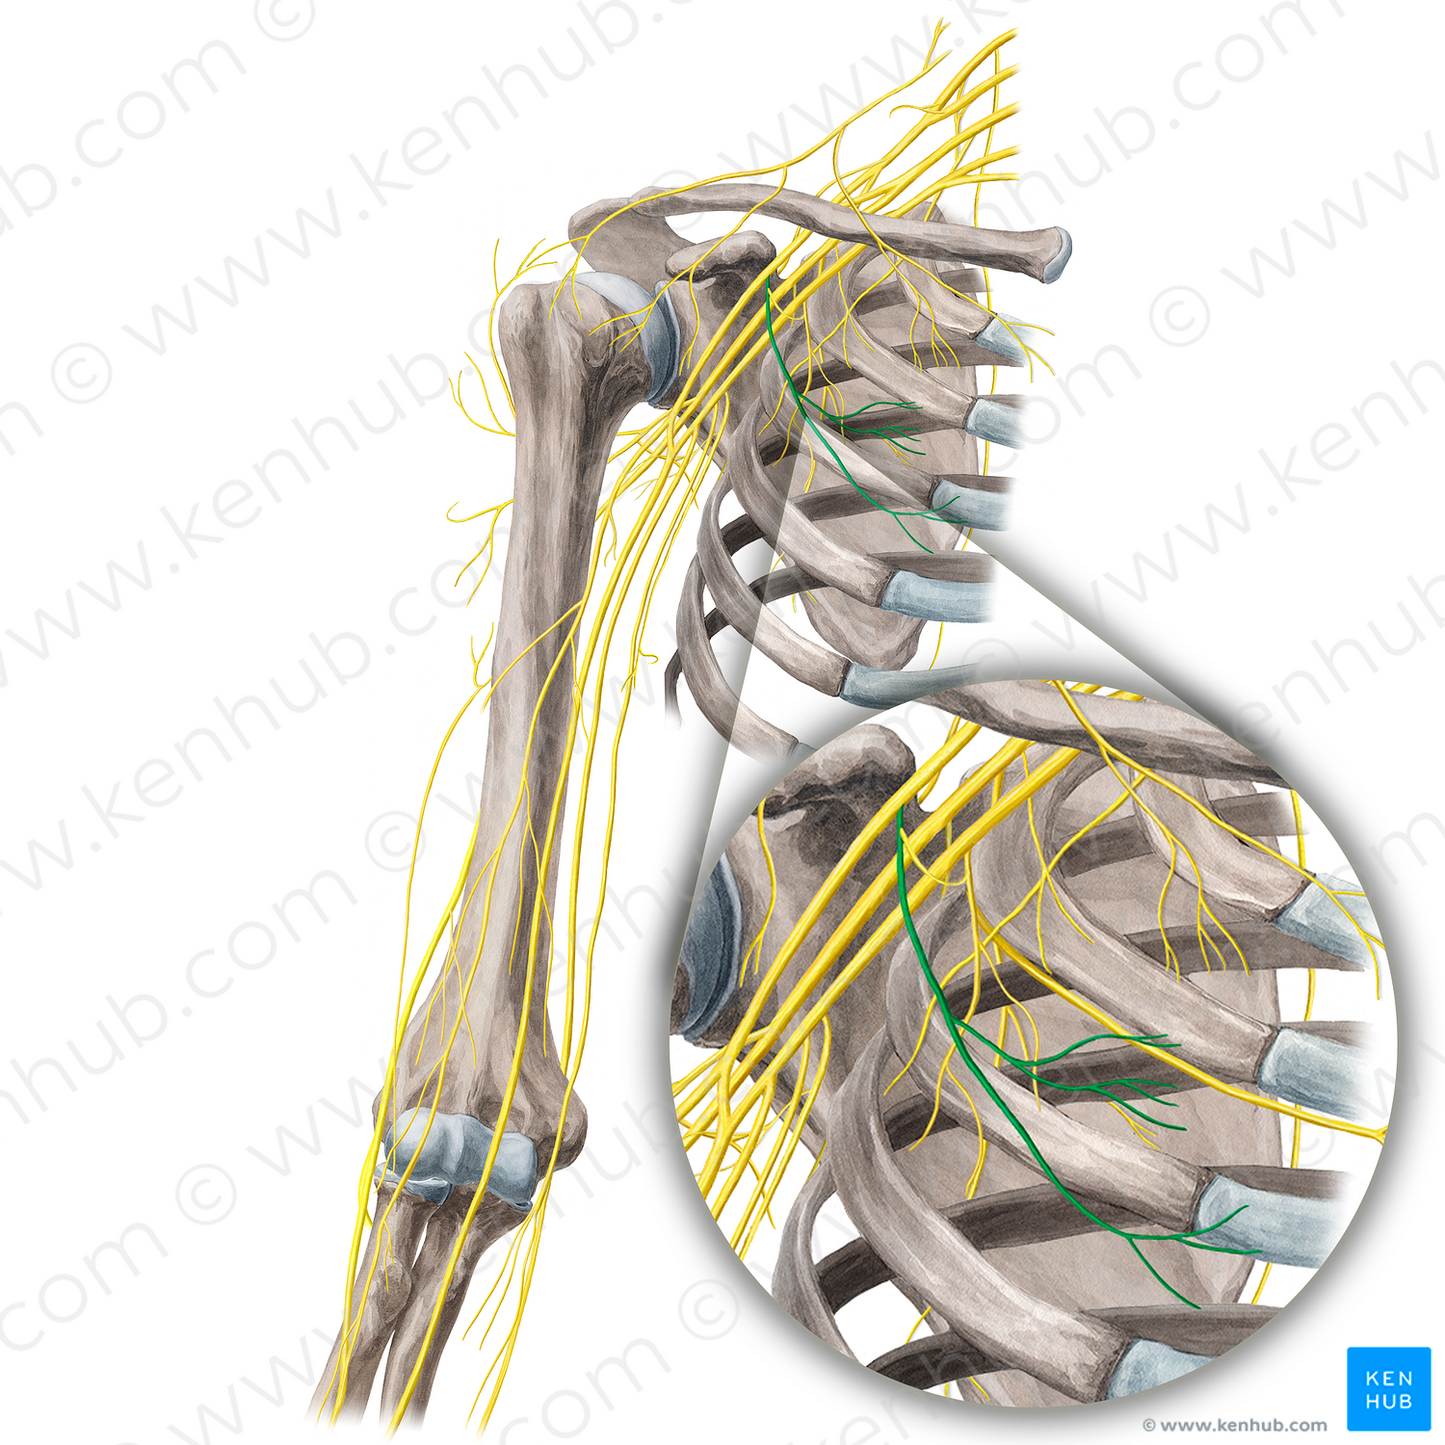 Lateral pectoral nerve (#21665)